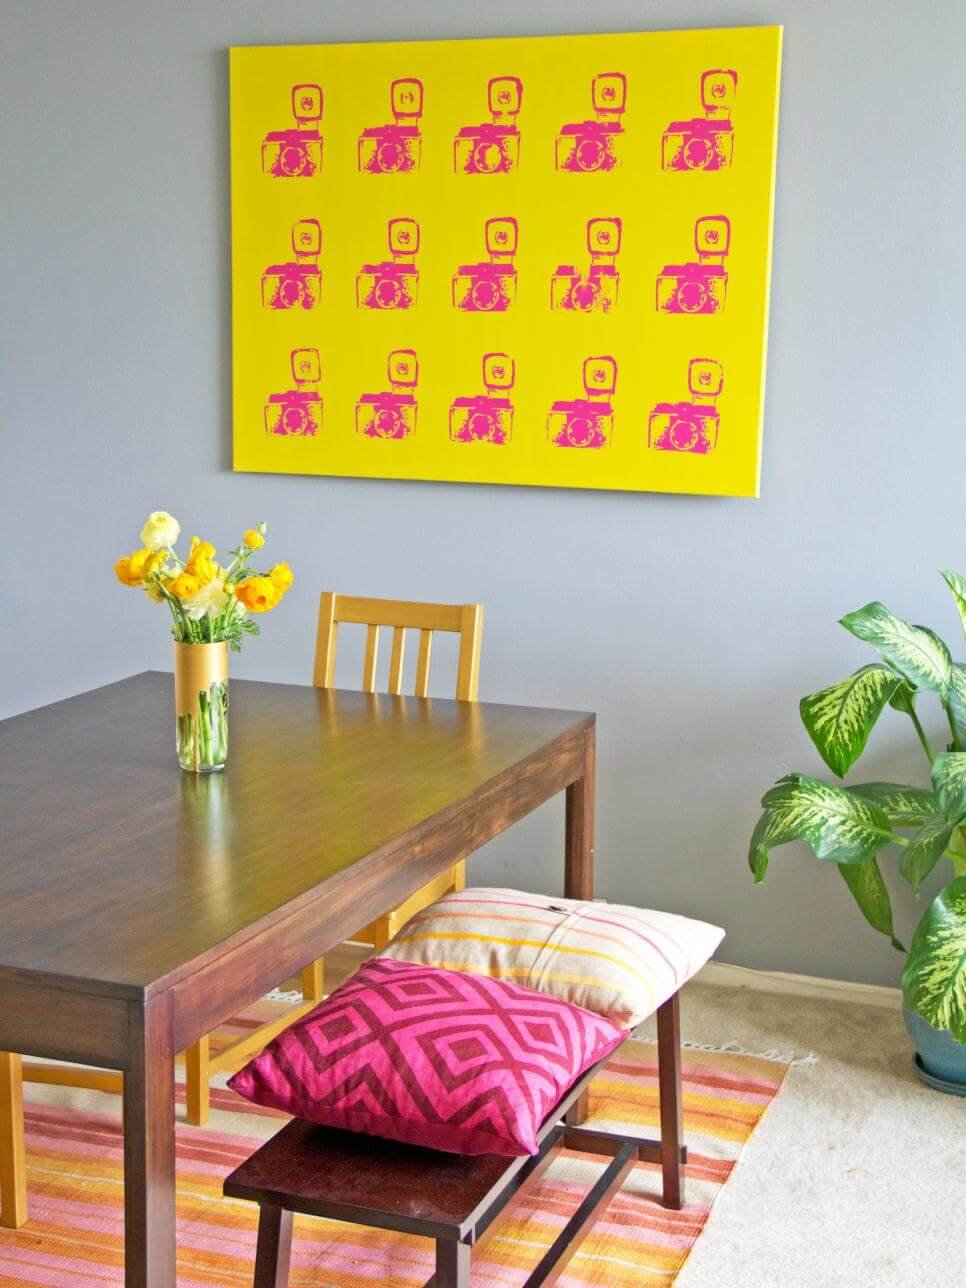 20 Ways to Decorate Your Room without Spending a Bomb